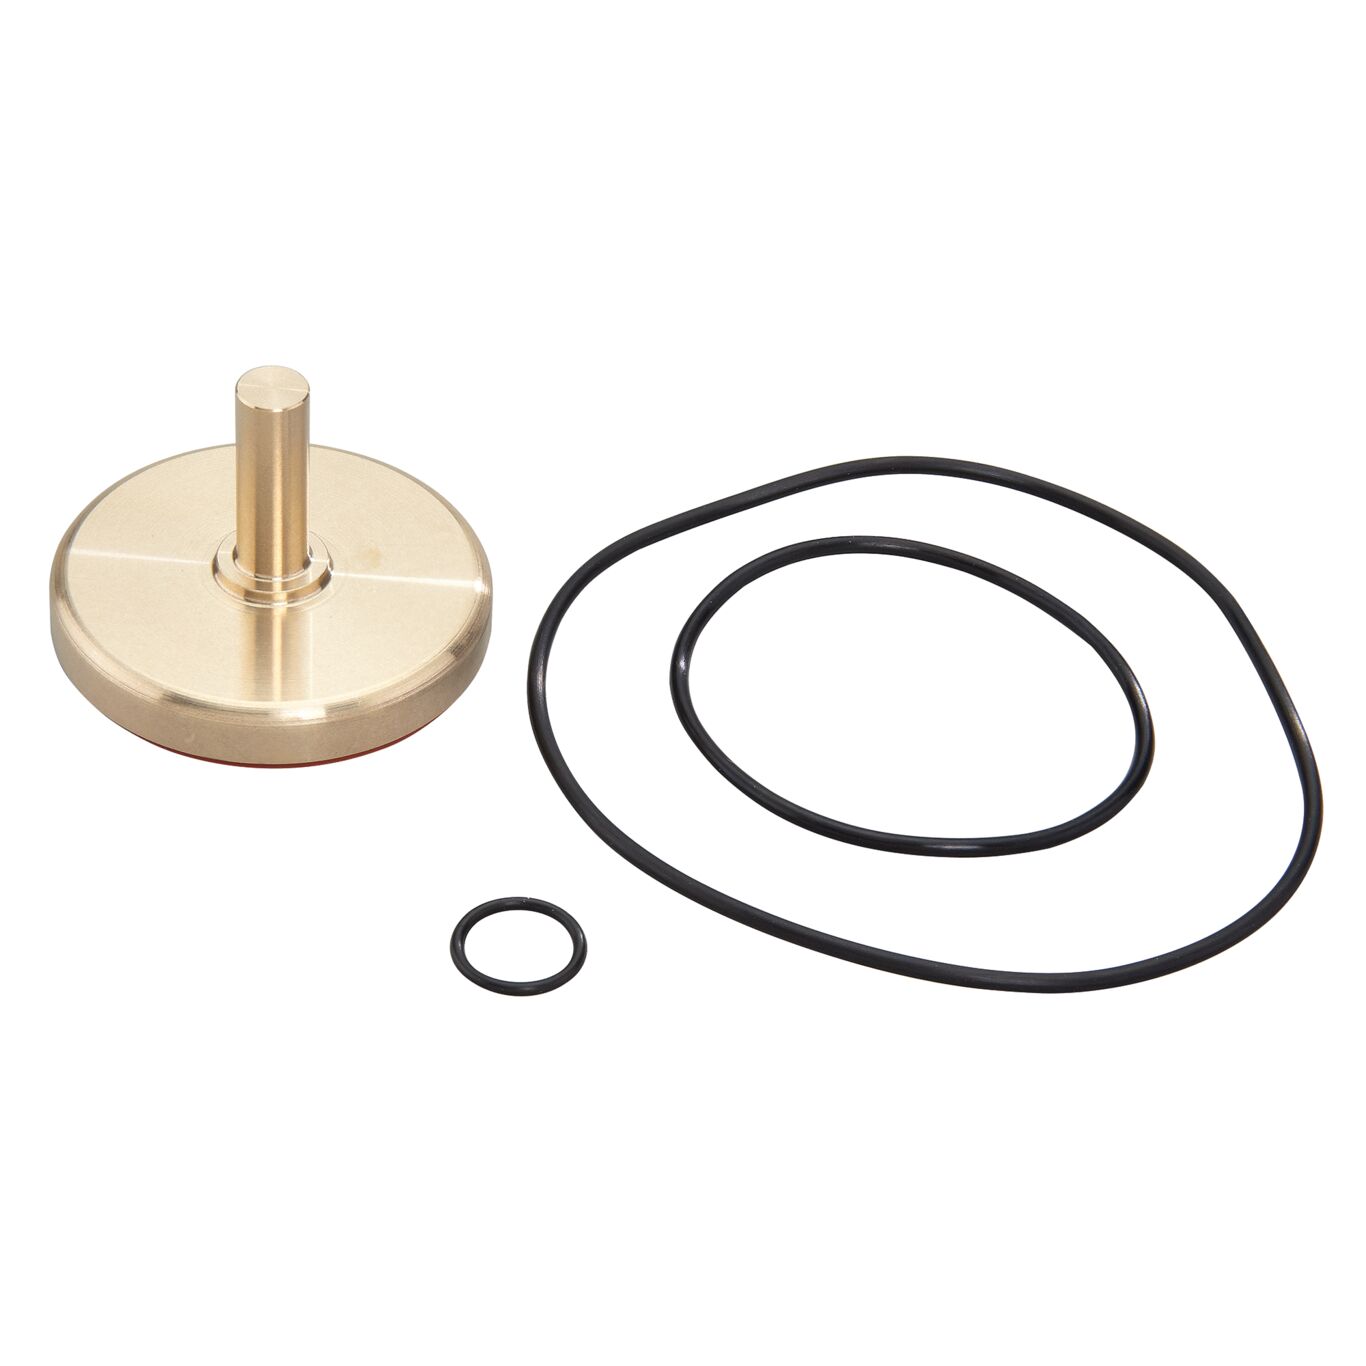 Product Image Repair Kit 1 1/4 to 2 IN Backflow Repair Kit, First Check Rubber Parts Kit, 009